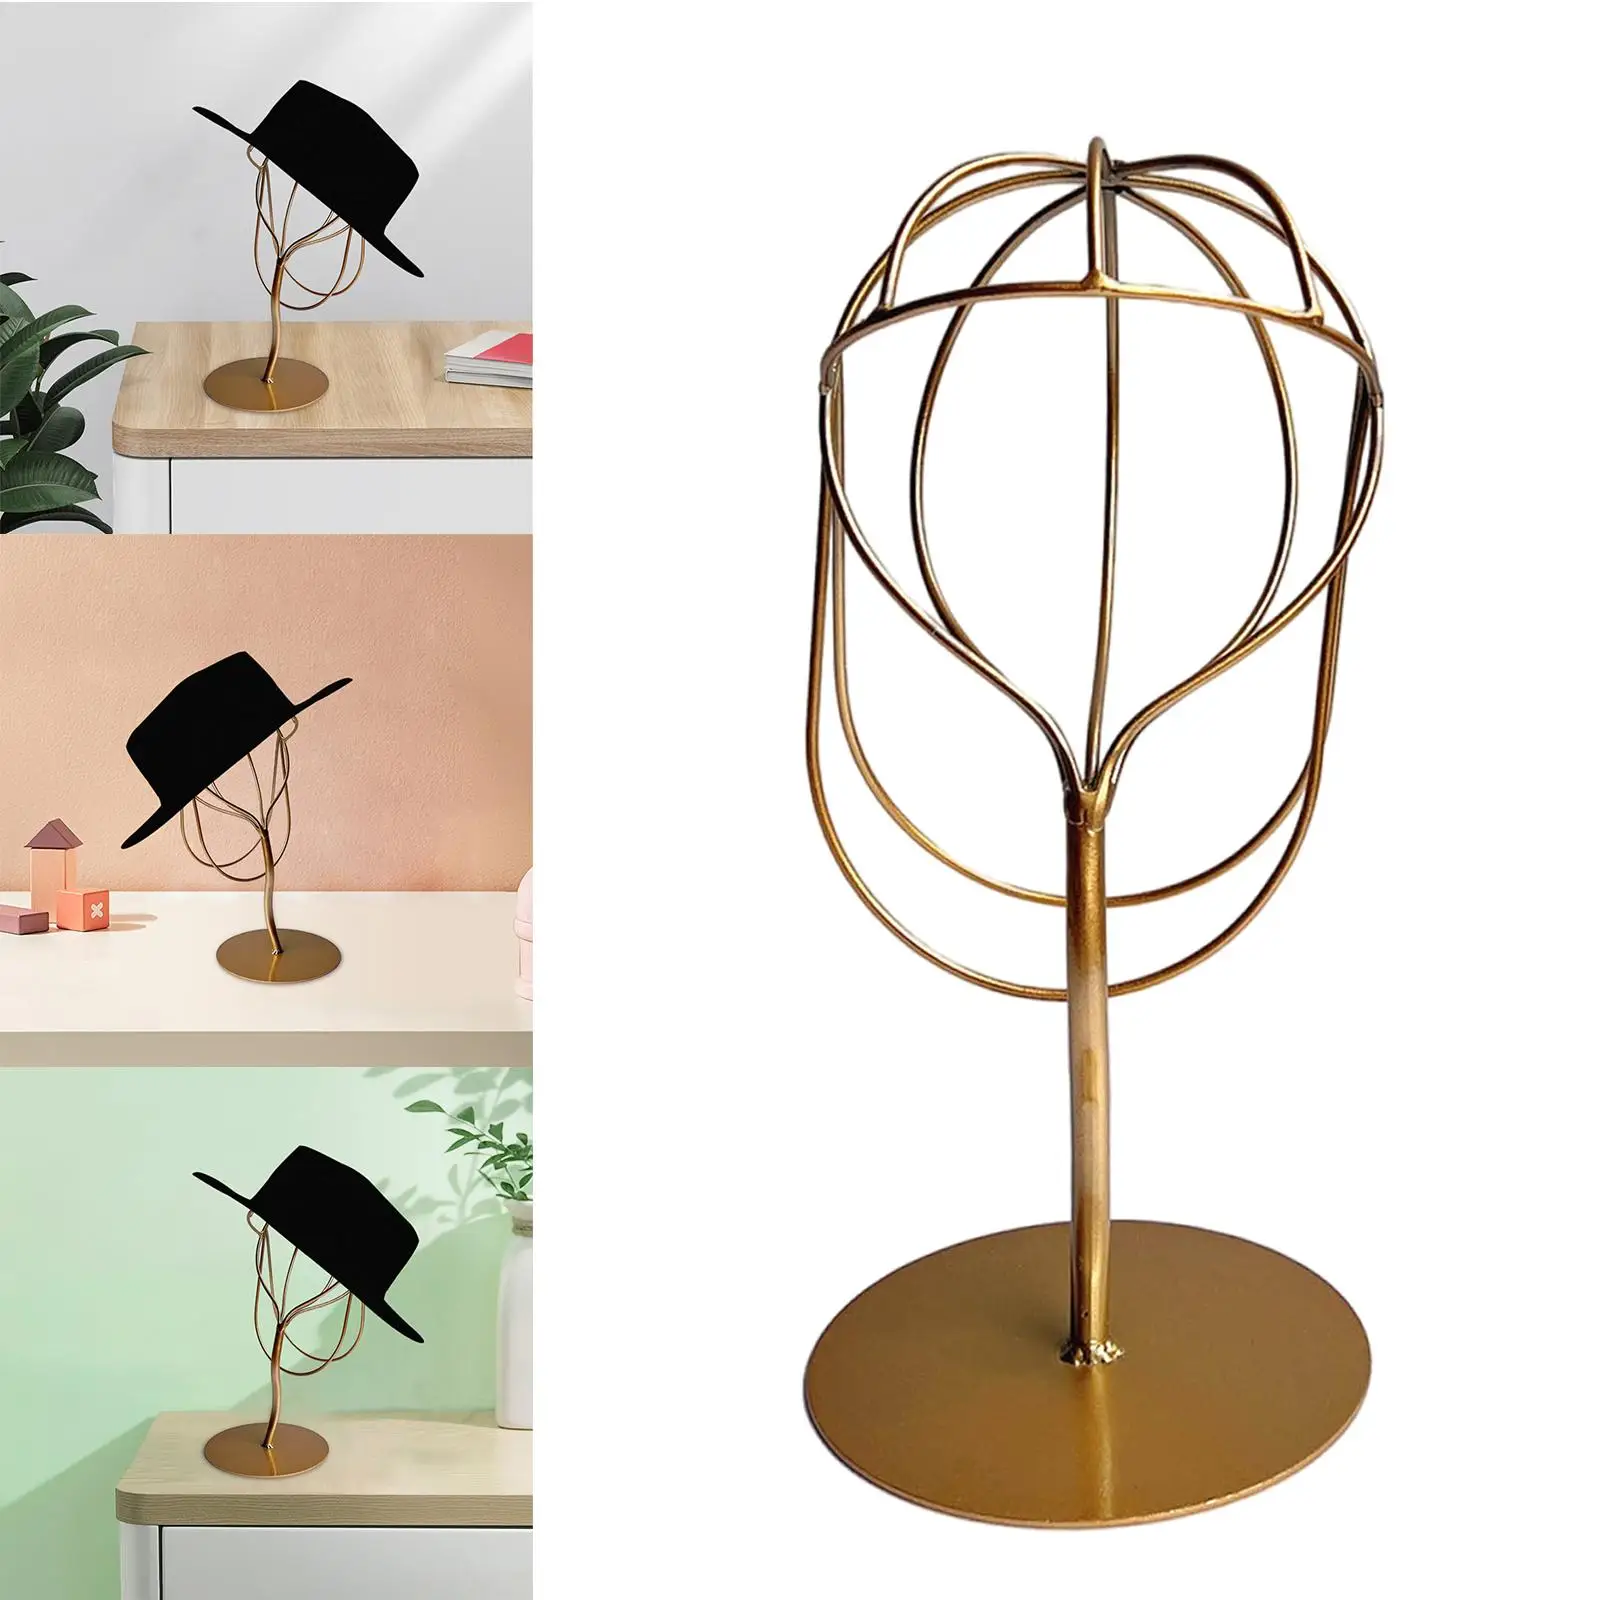 Iron Hat Stands Sports Hat Stands Display Stand Mannequin Hat Holder Storage Stand for Salon Home